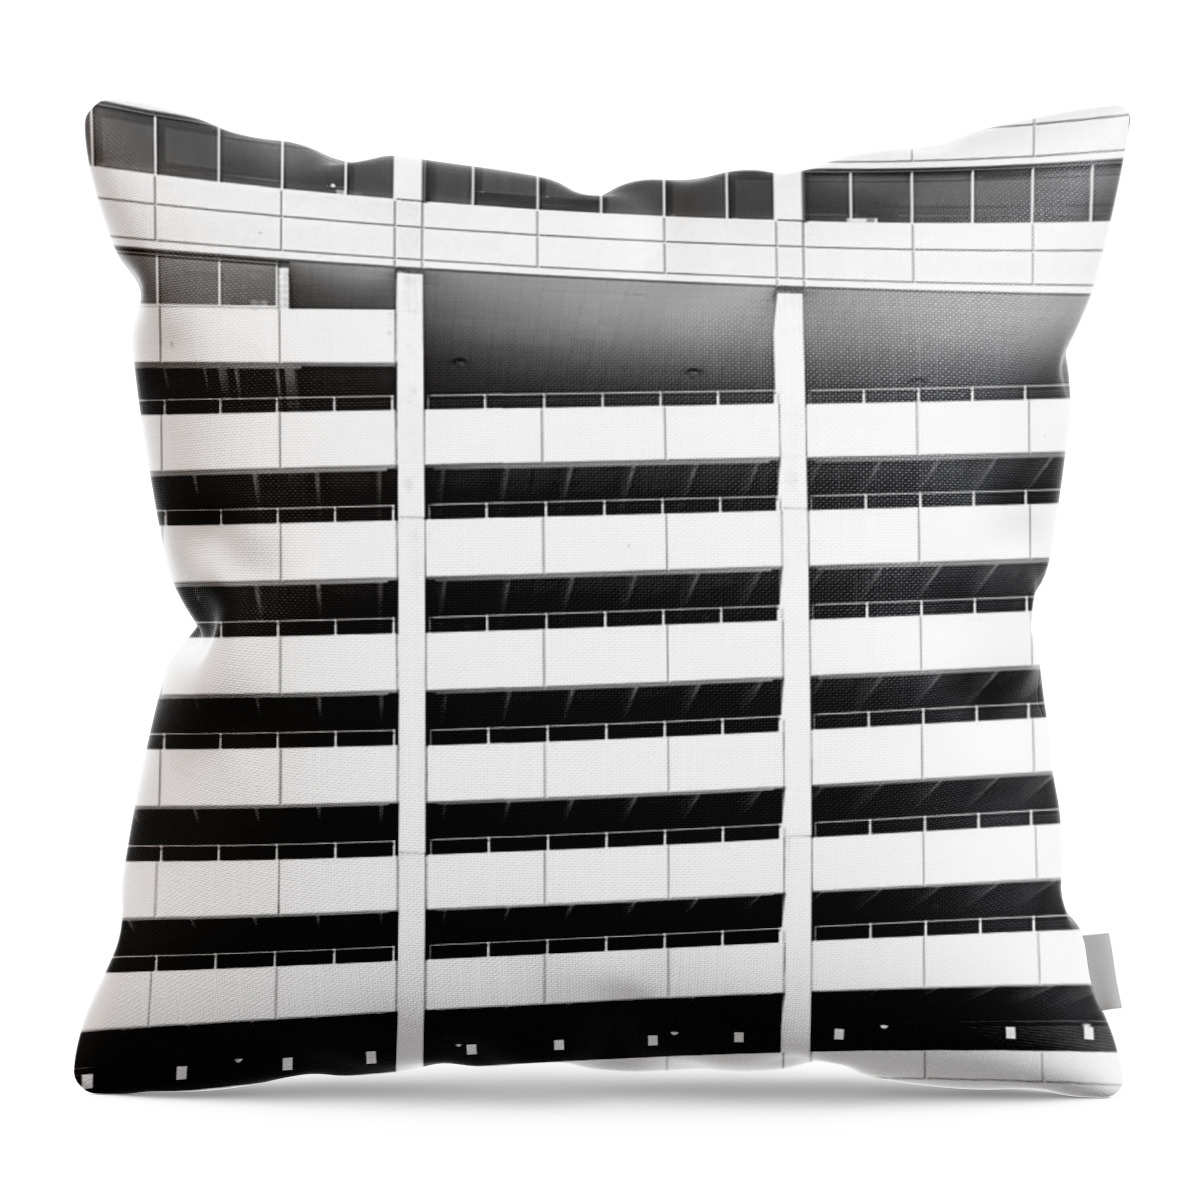 Parking Garage Abstract Architecture Building Black White Monchrome Throw Pillow featuring the photograph Parking Garage by Ken DePue